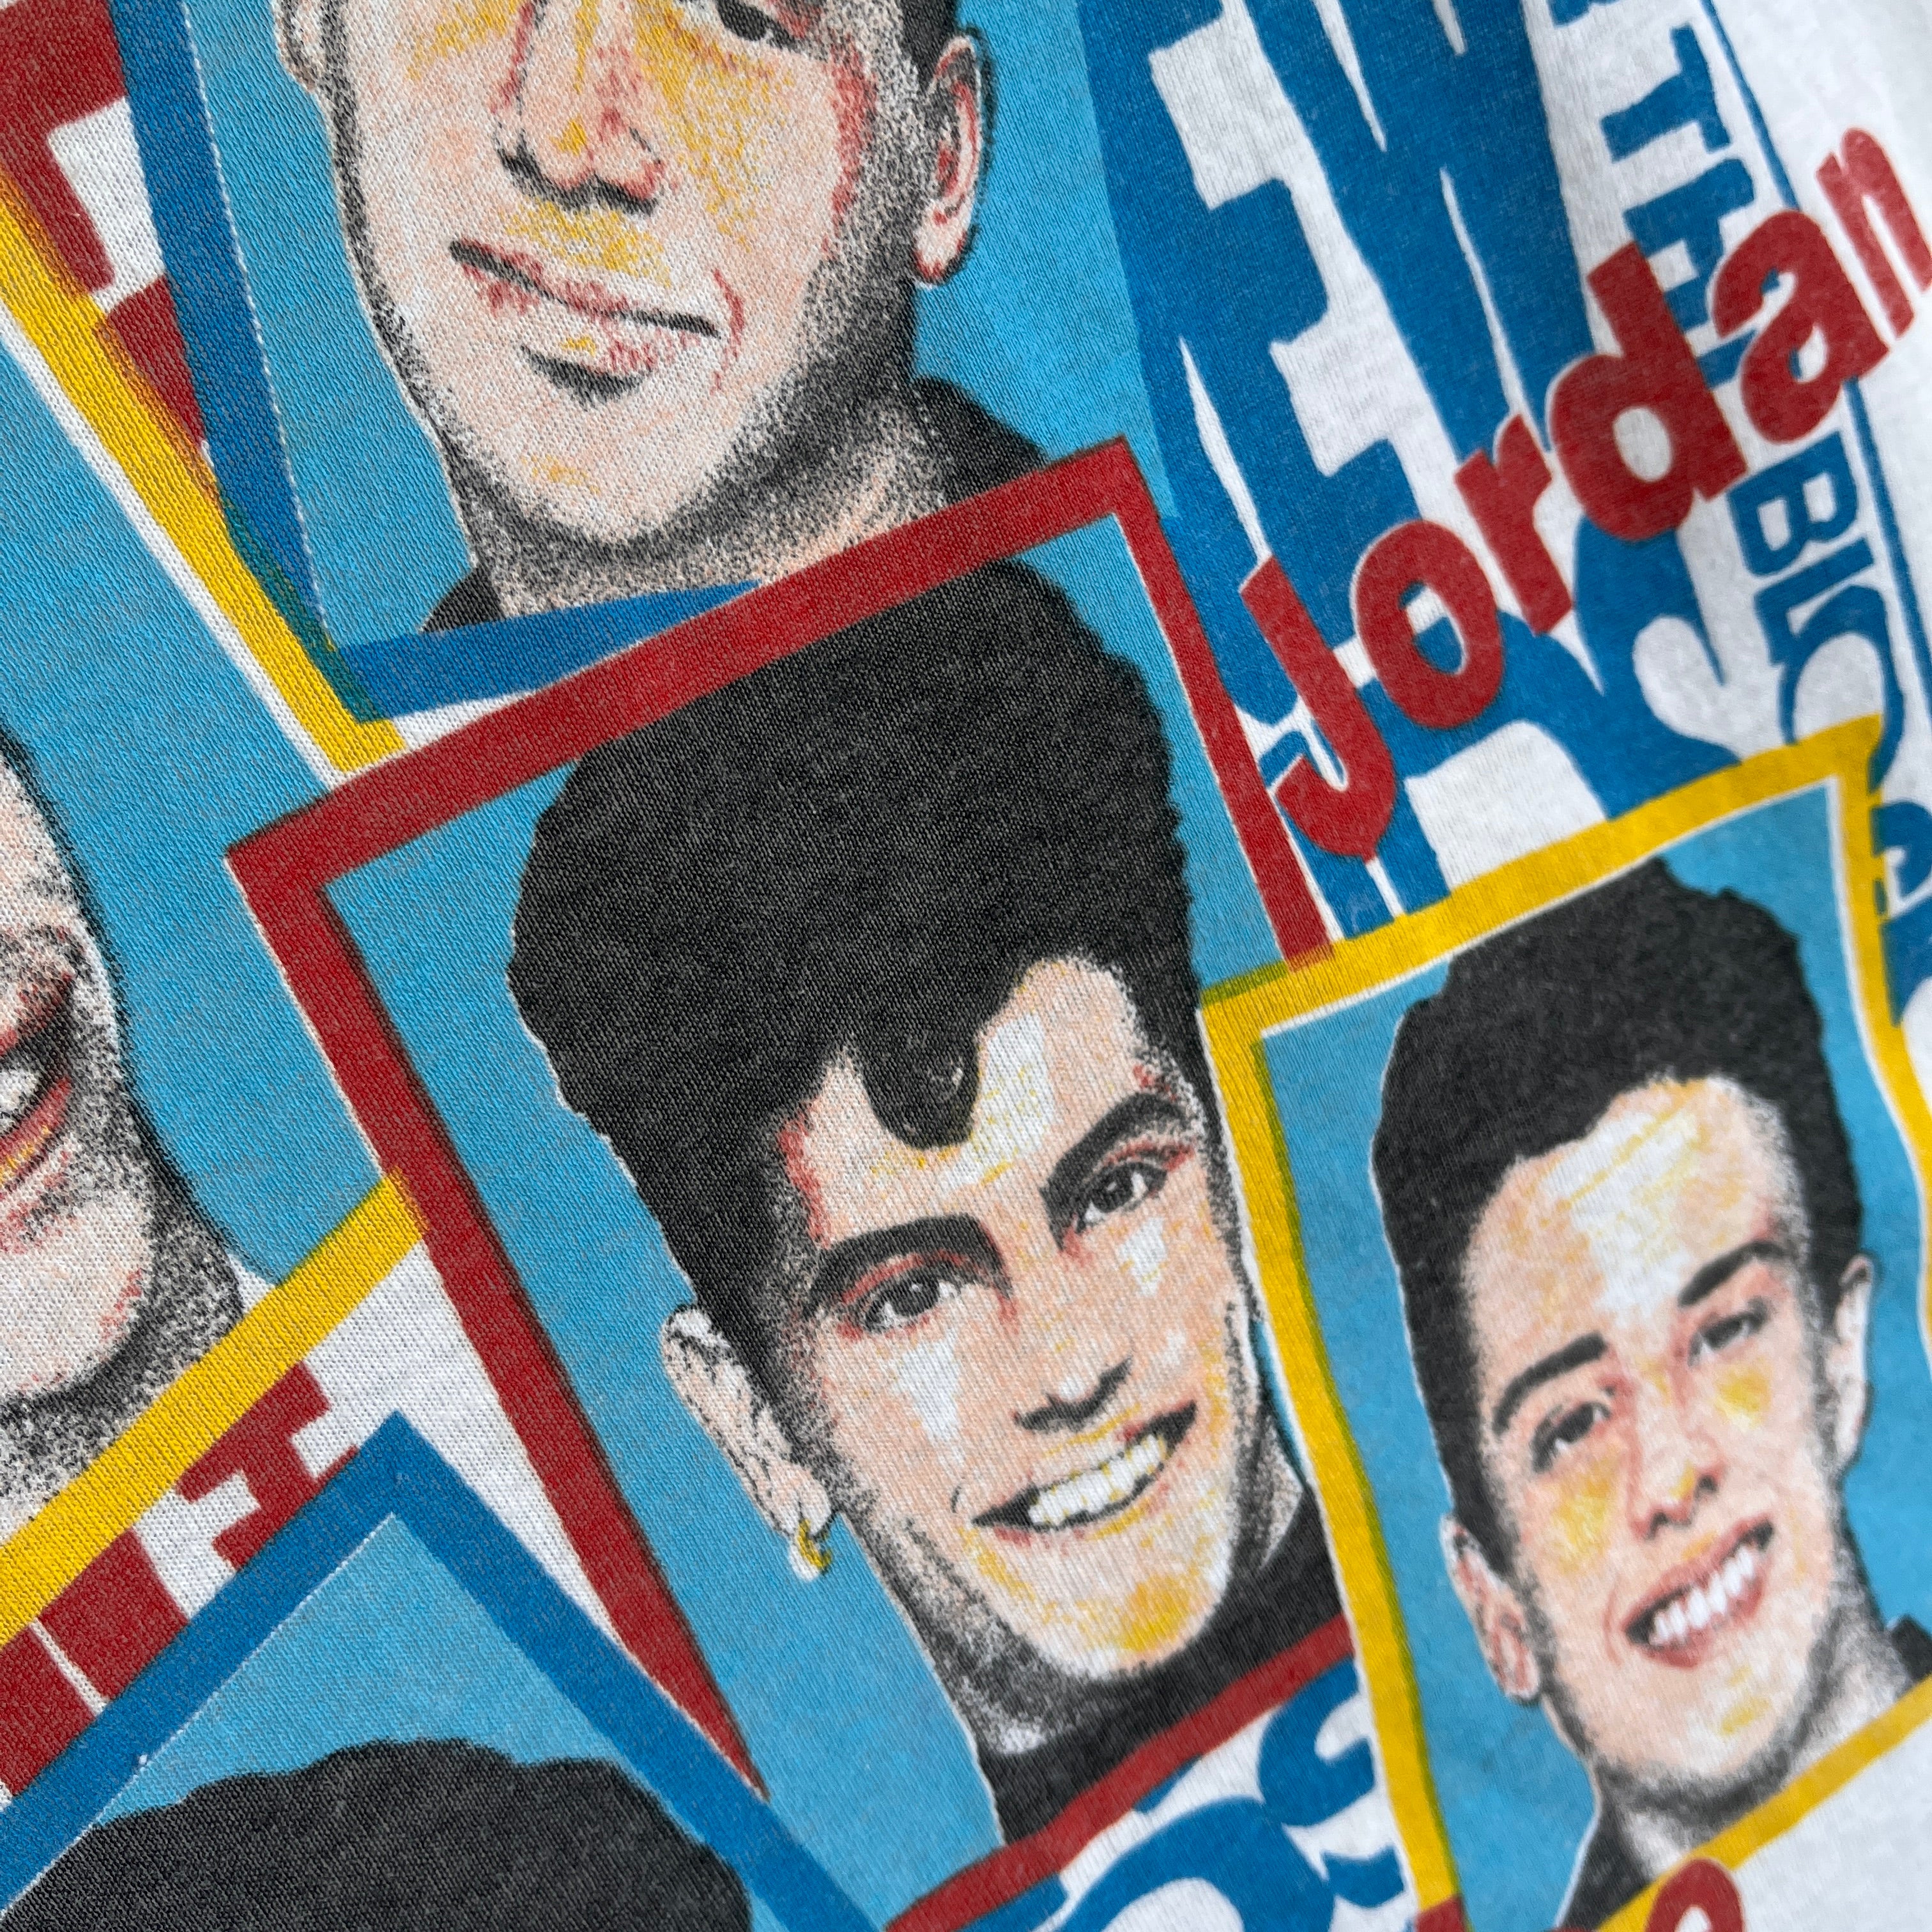 1990 New Kids On The Block T-Shirt by Screen Stars